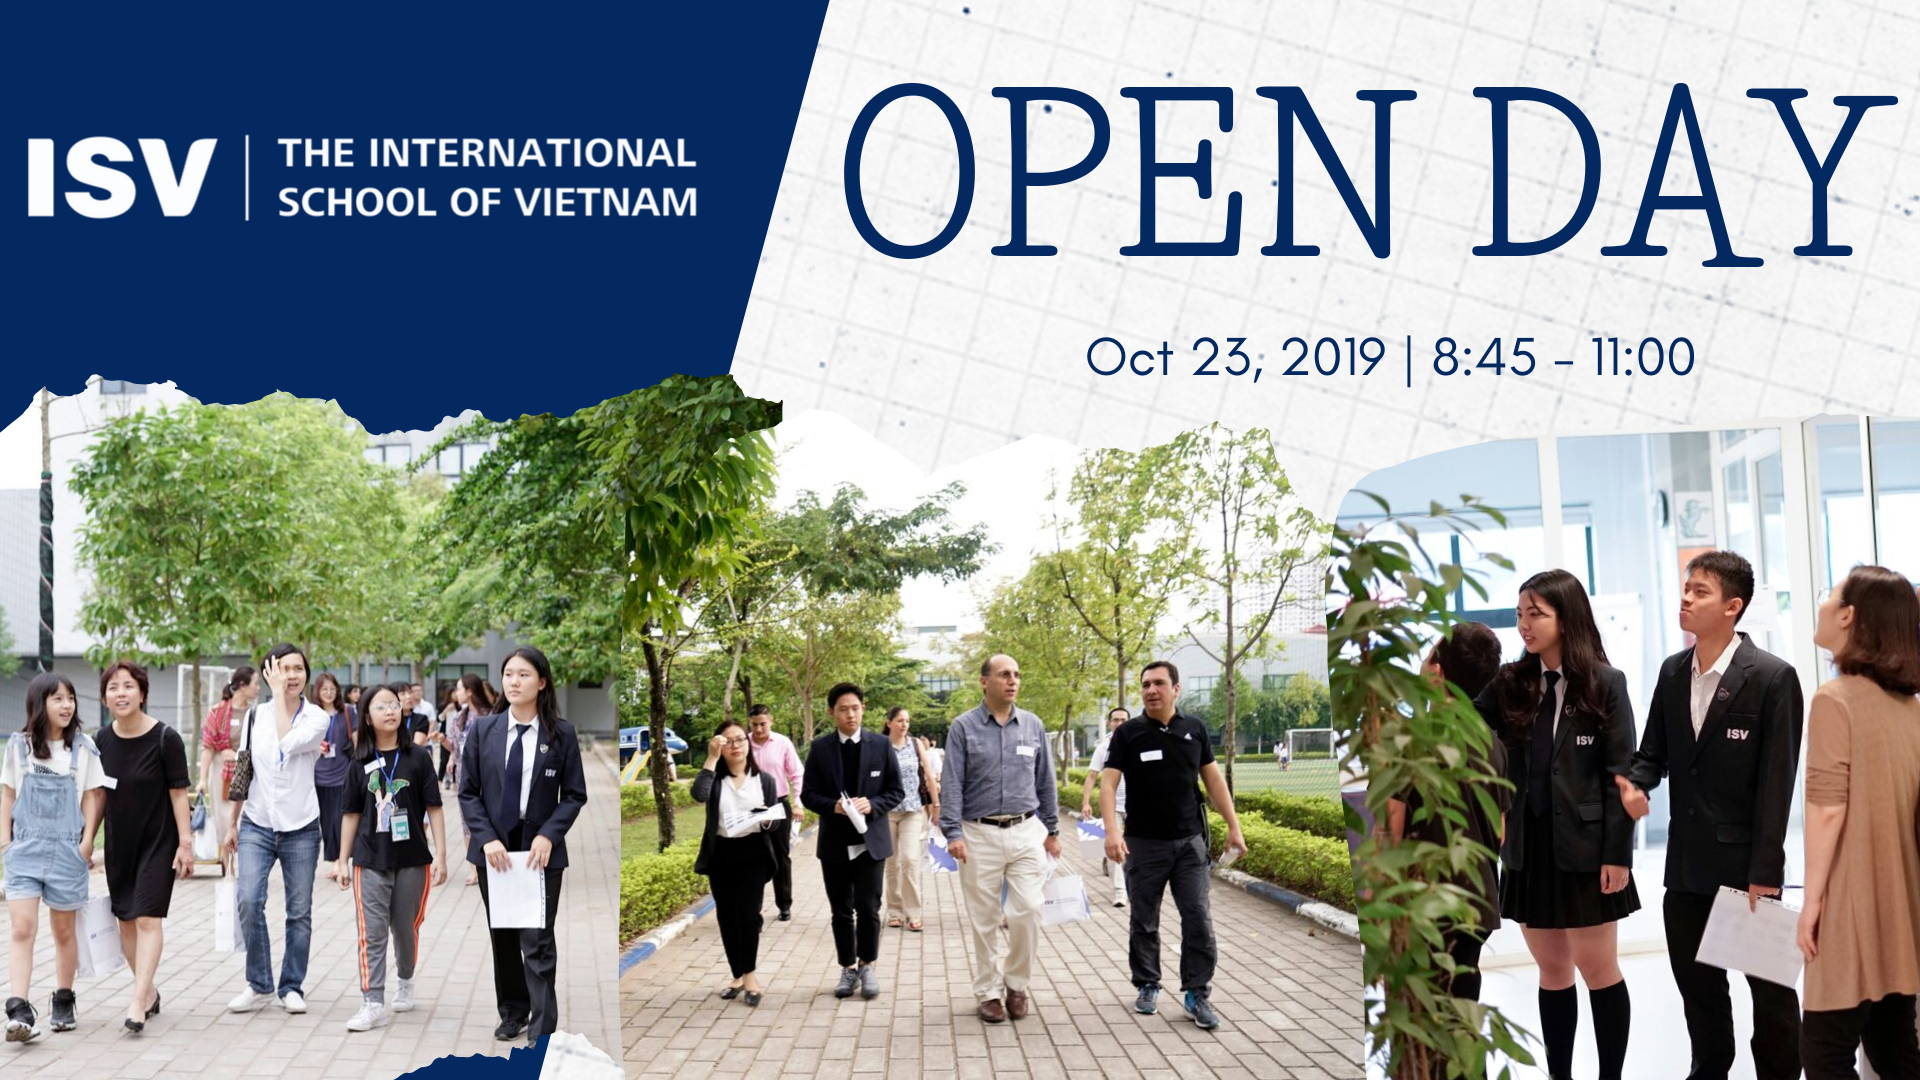 OPEN DAY OCT 23